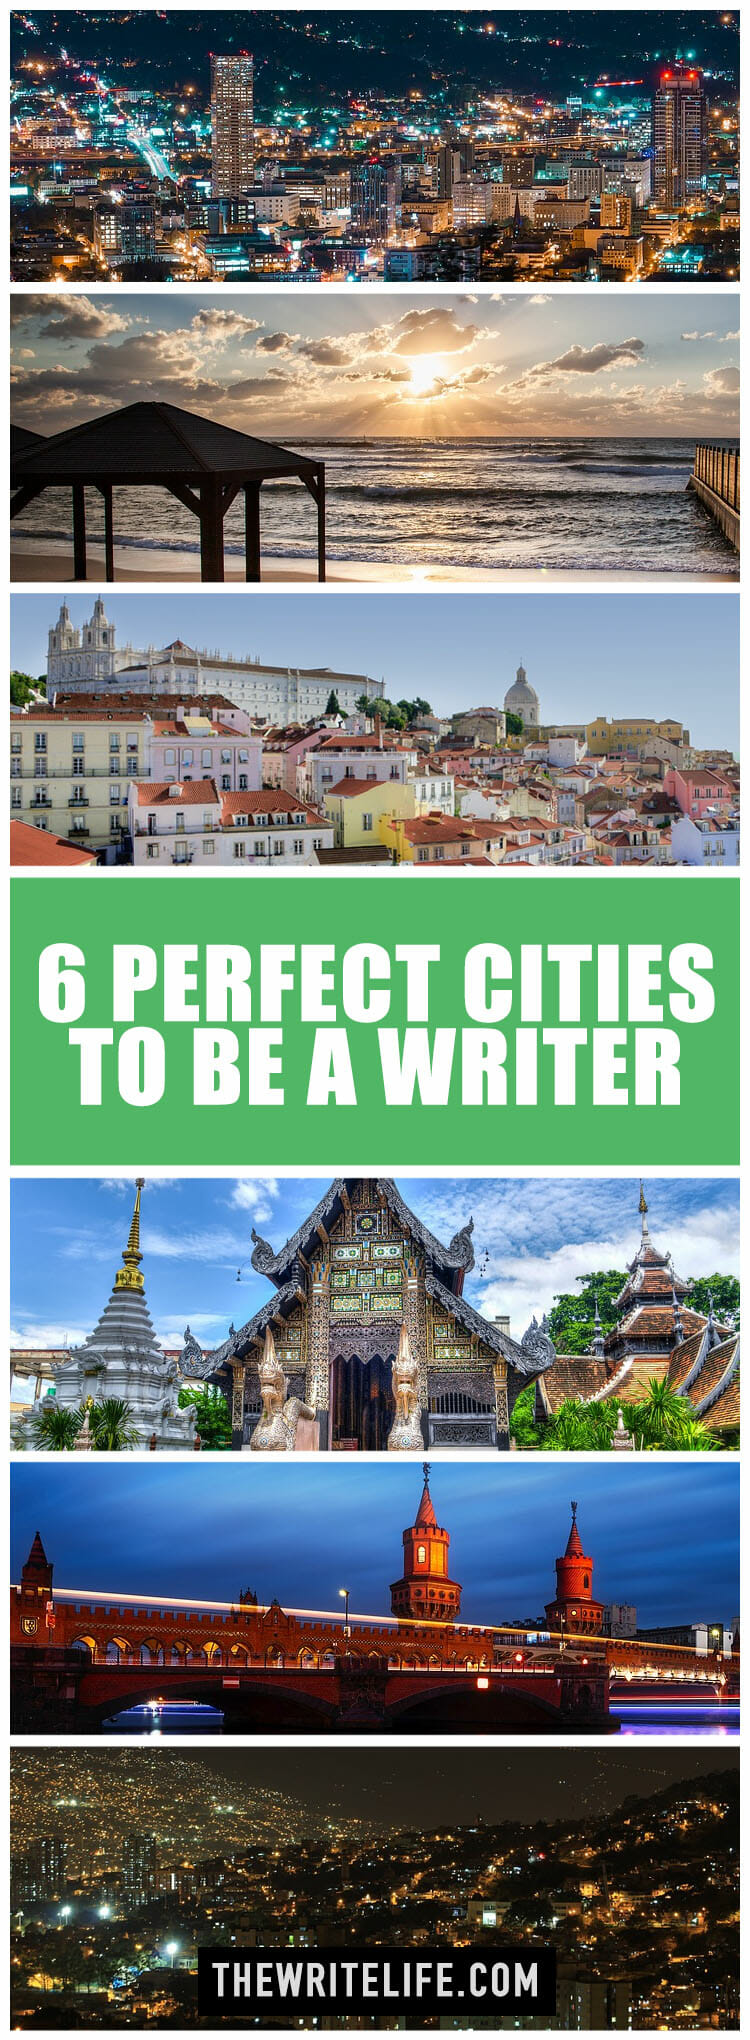 cities to be a writer